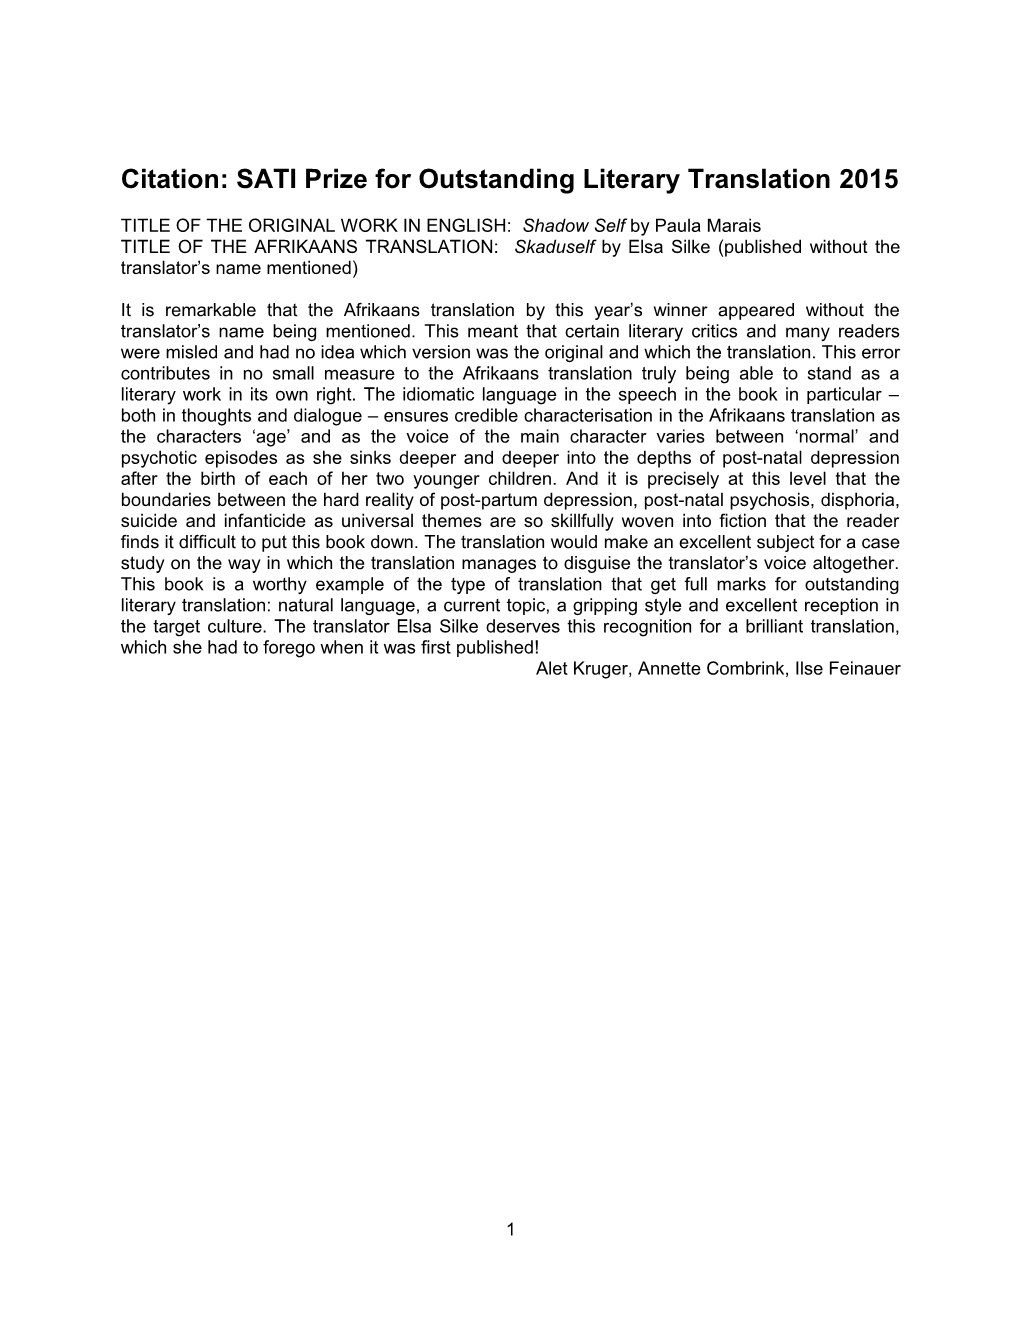 Citation for the Winning Entry: the Sati Prize for Outstanding Translation Dictionaries 2015